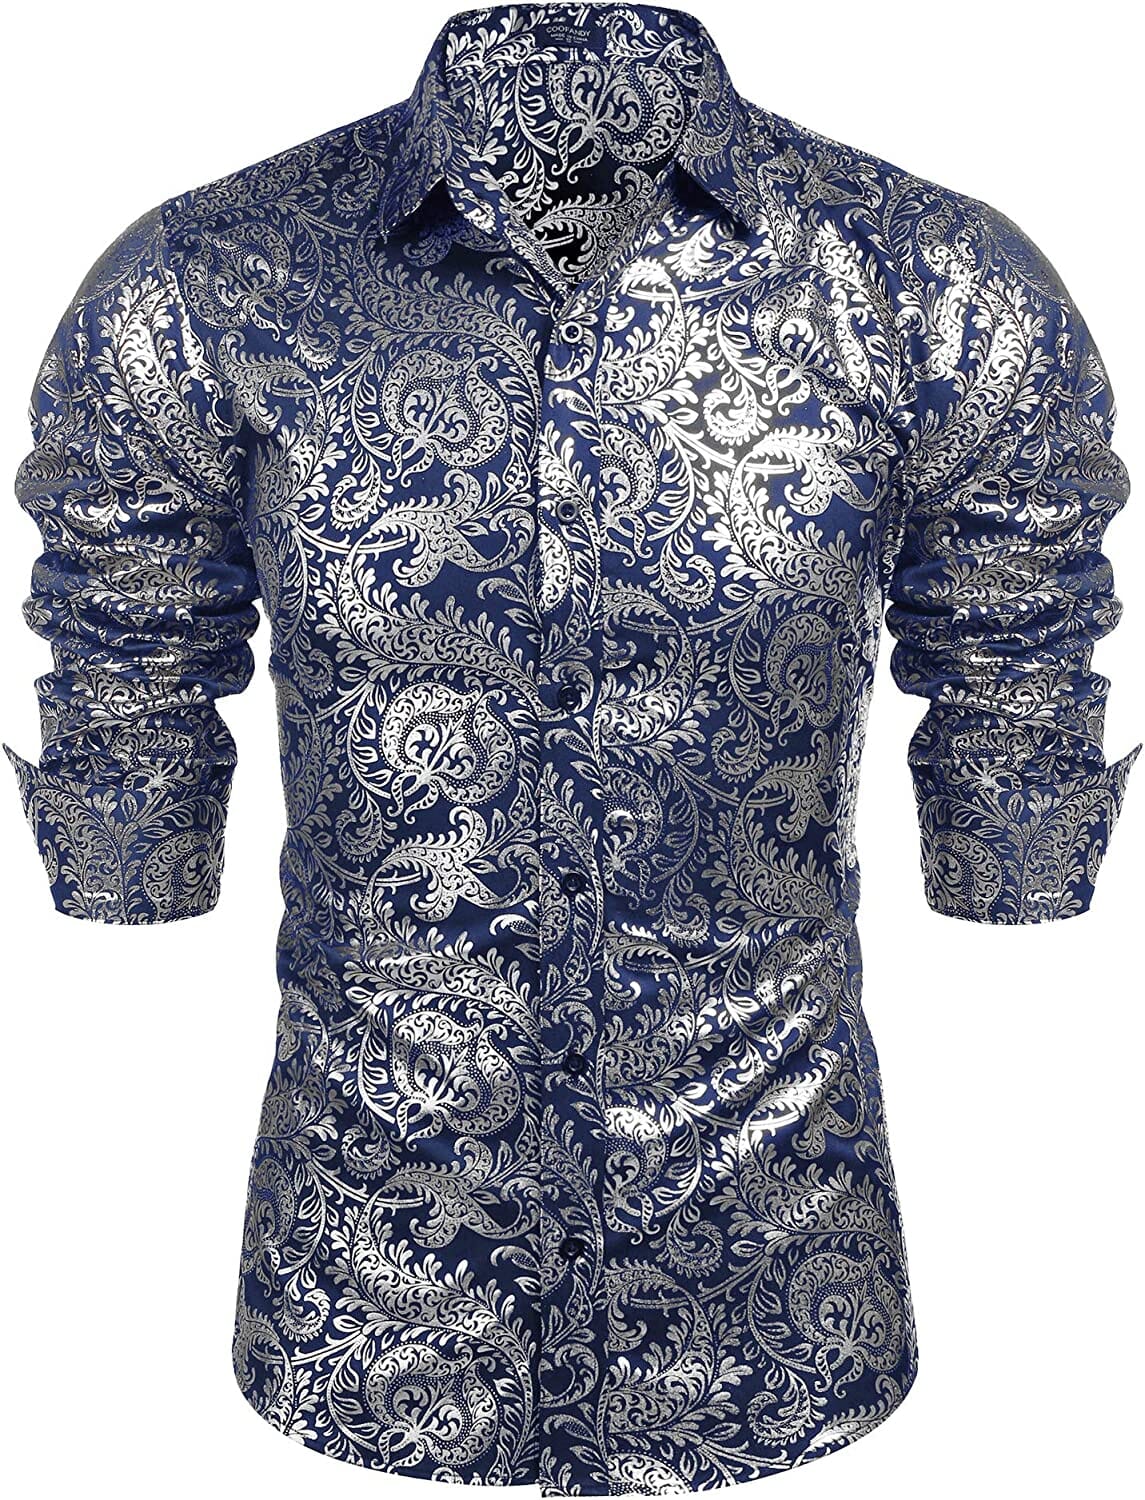 Elegant Floral Dress Shirt - Premium Quality, Perfect for Any Occasion ...